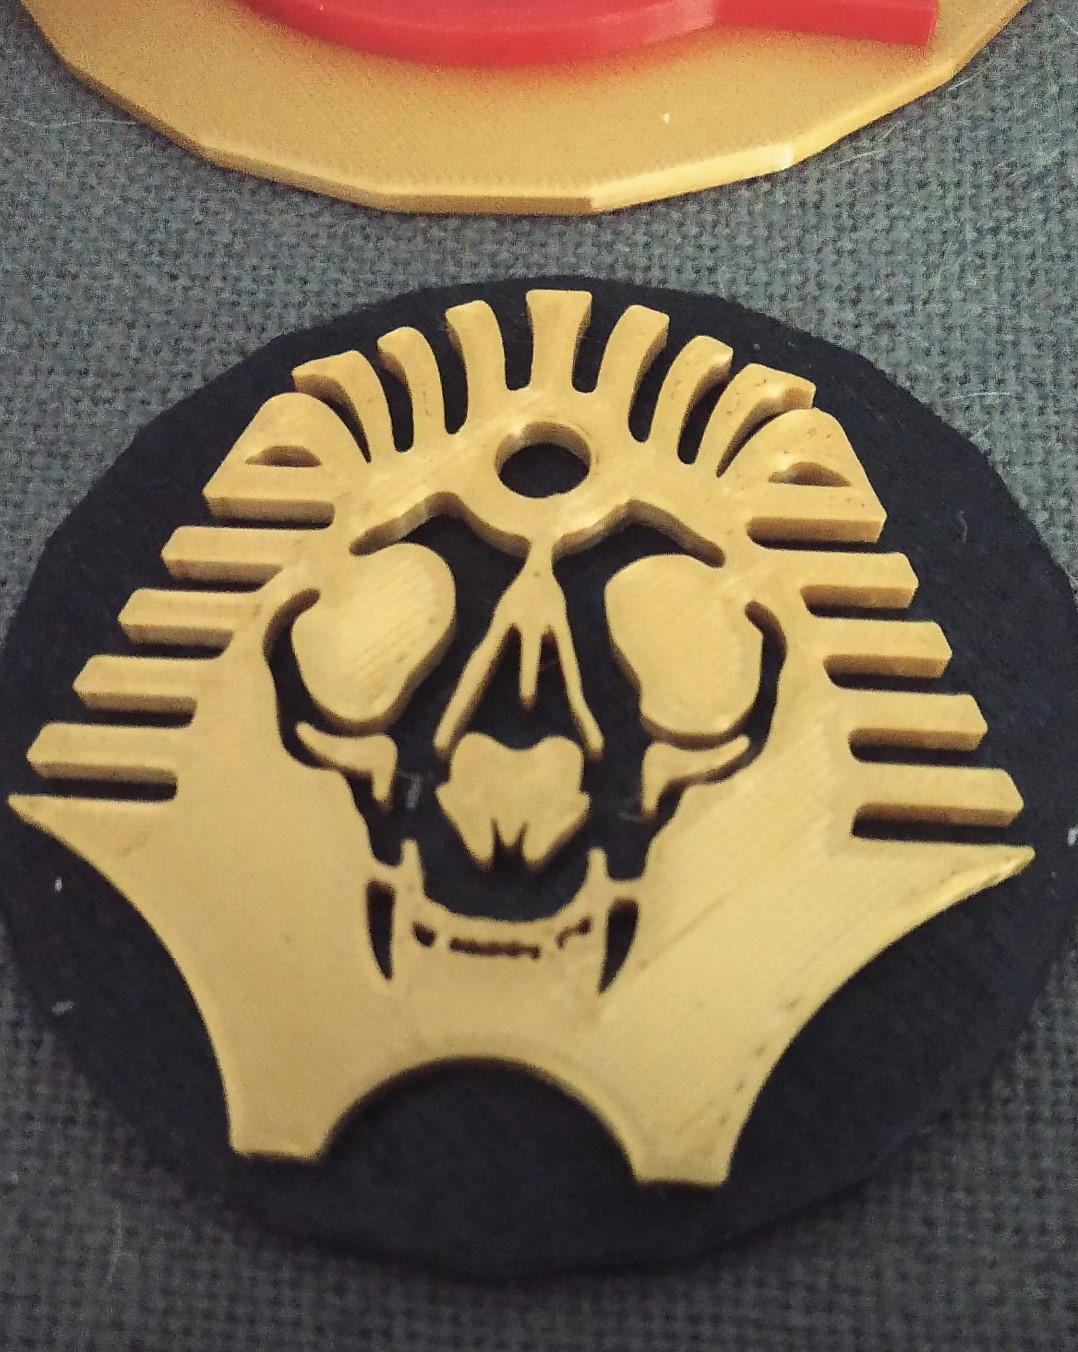 Sphinx (S.P.H.I.N.X) logo from Venture Bros 3d model